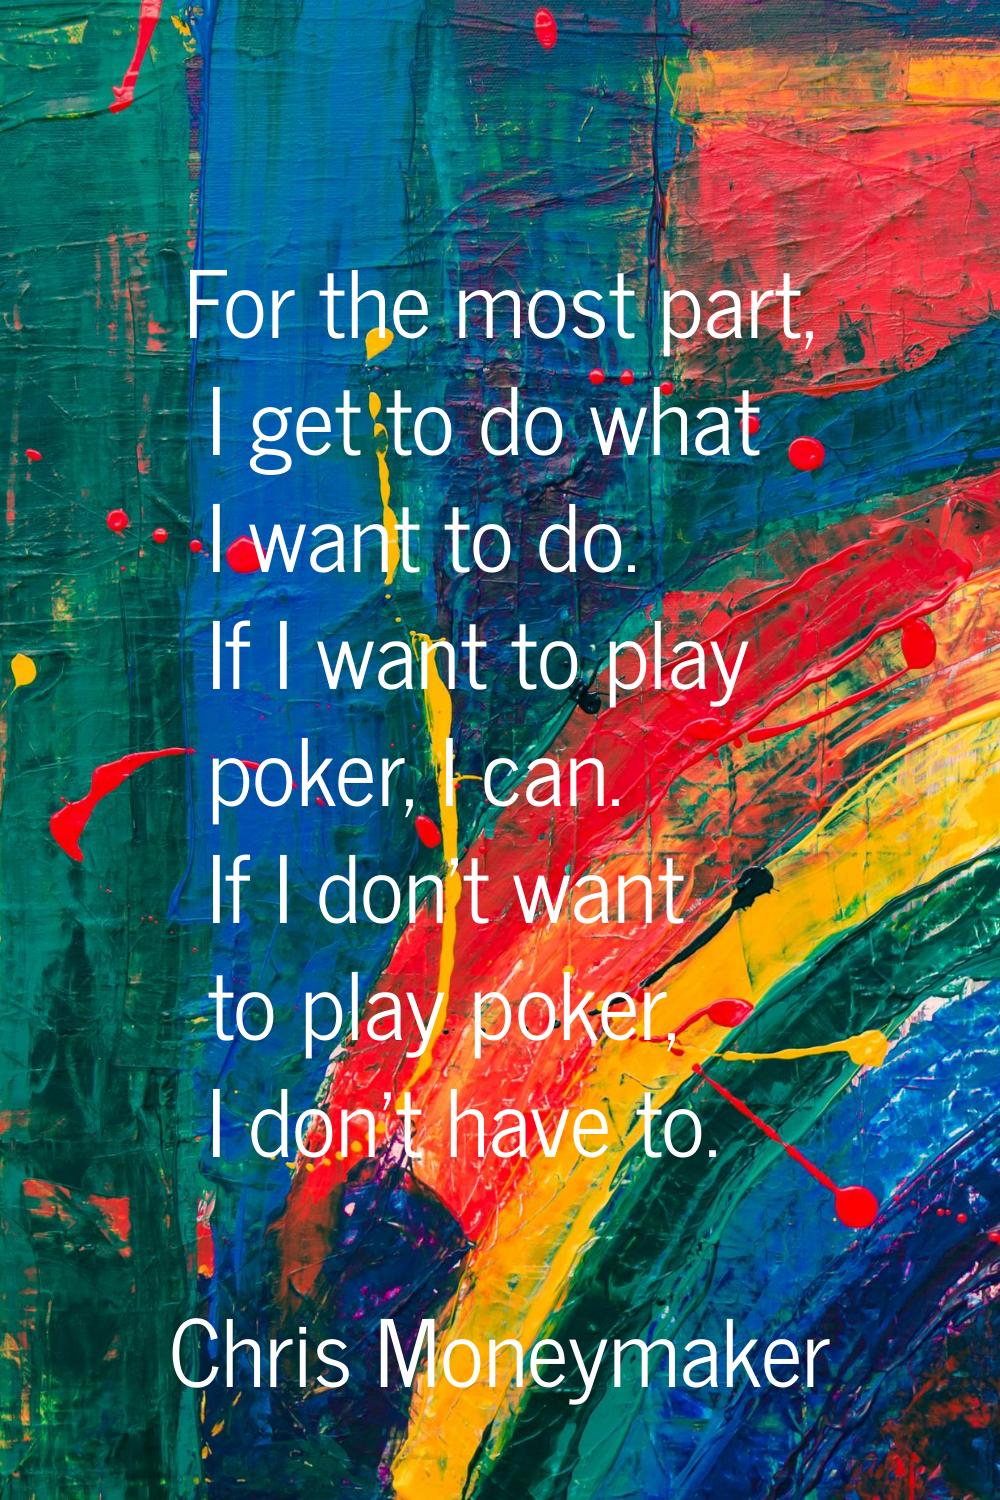 For the most part, I get to do what I want to do. If I want to play poker, I can. If I don't want t